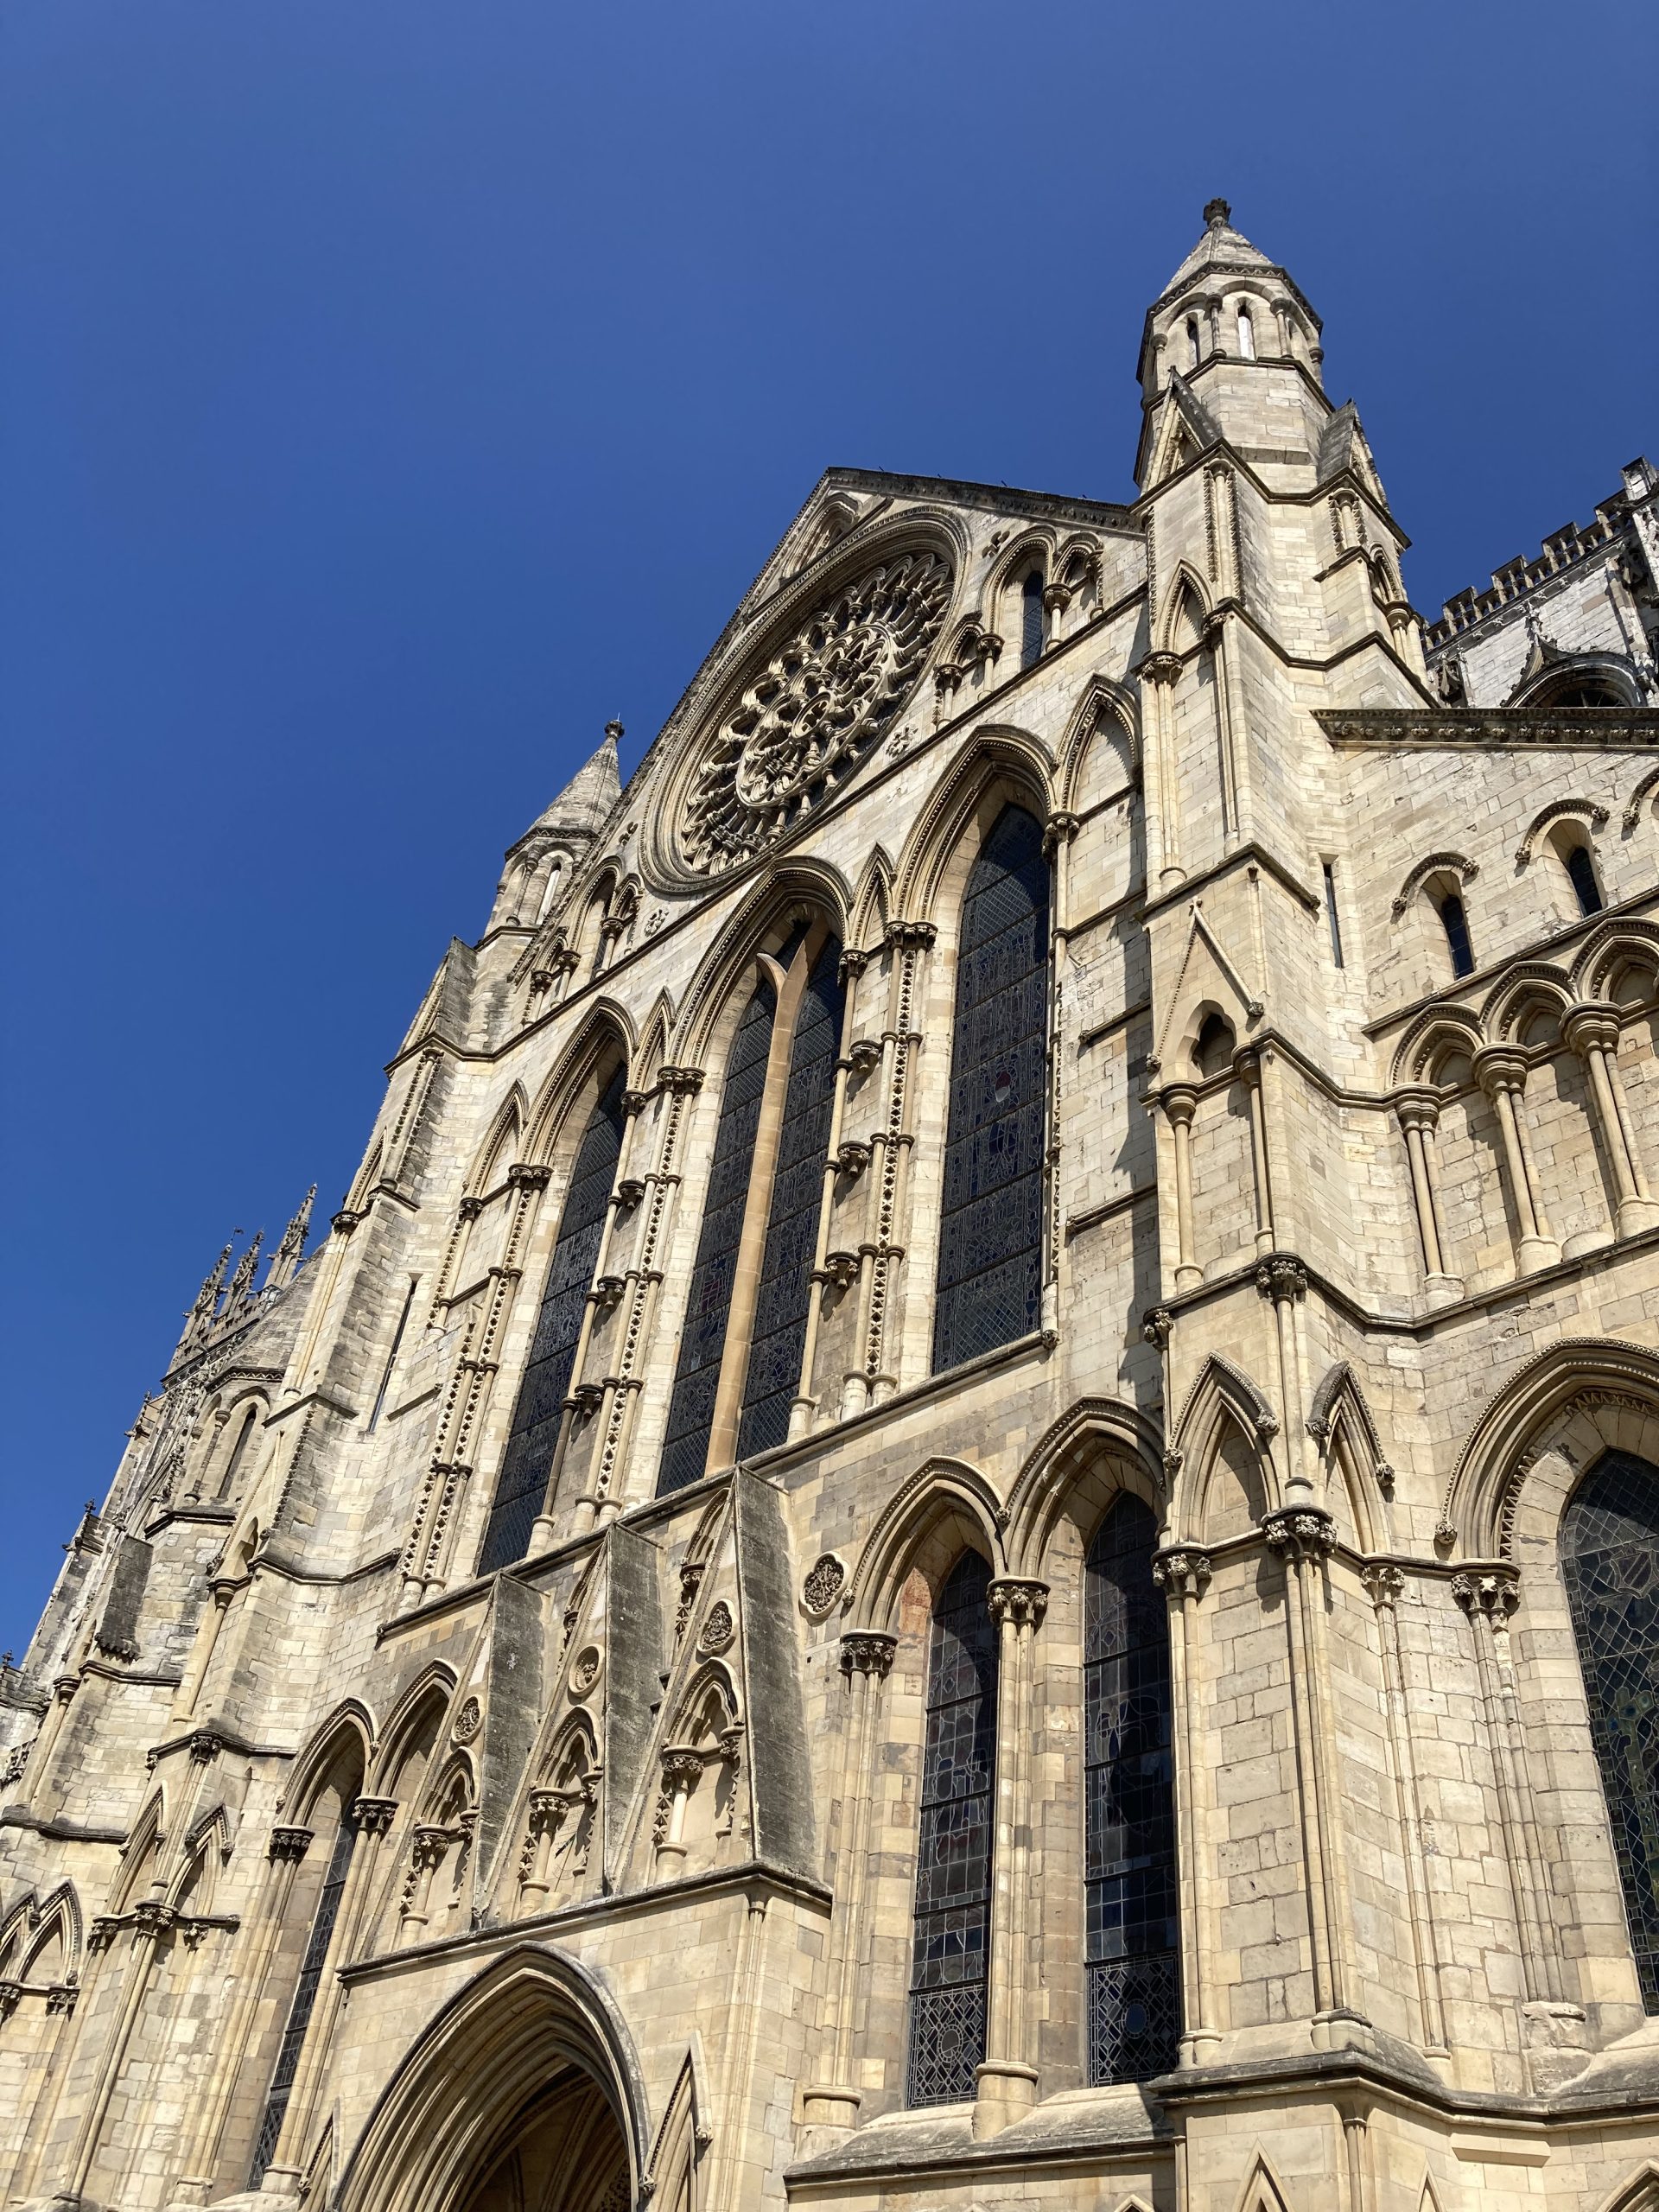 A picture of the front side of the York Minster with clear blue skies